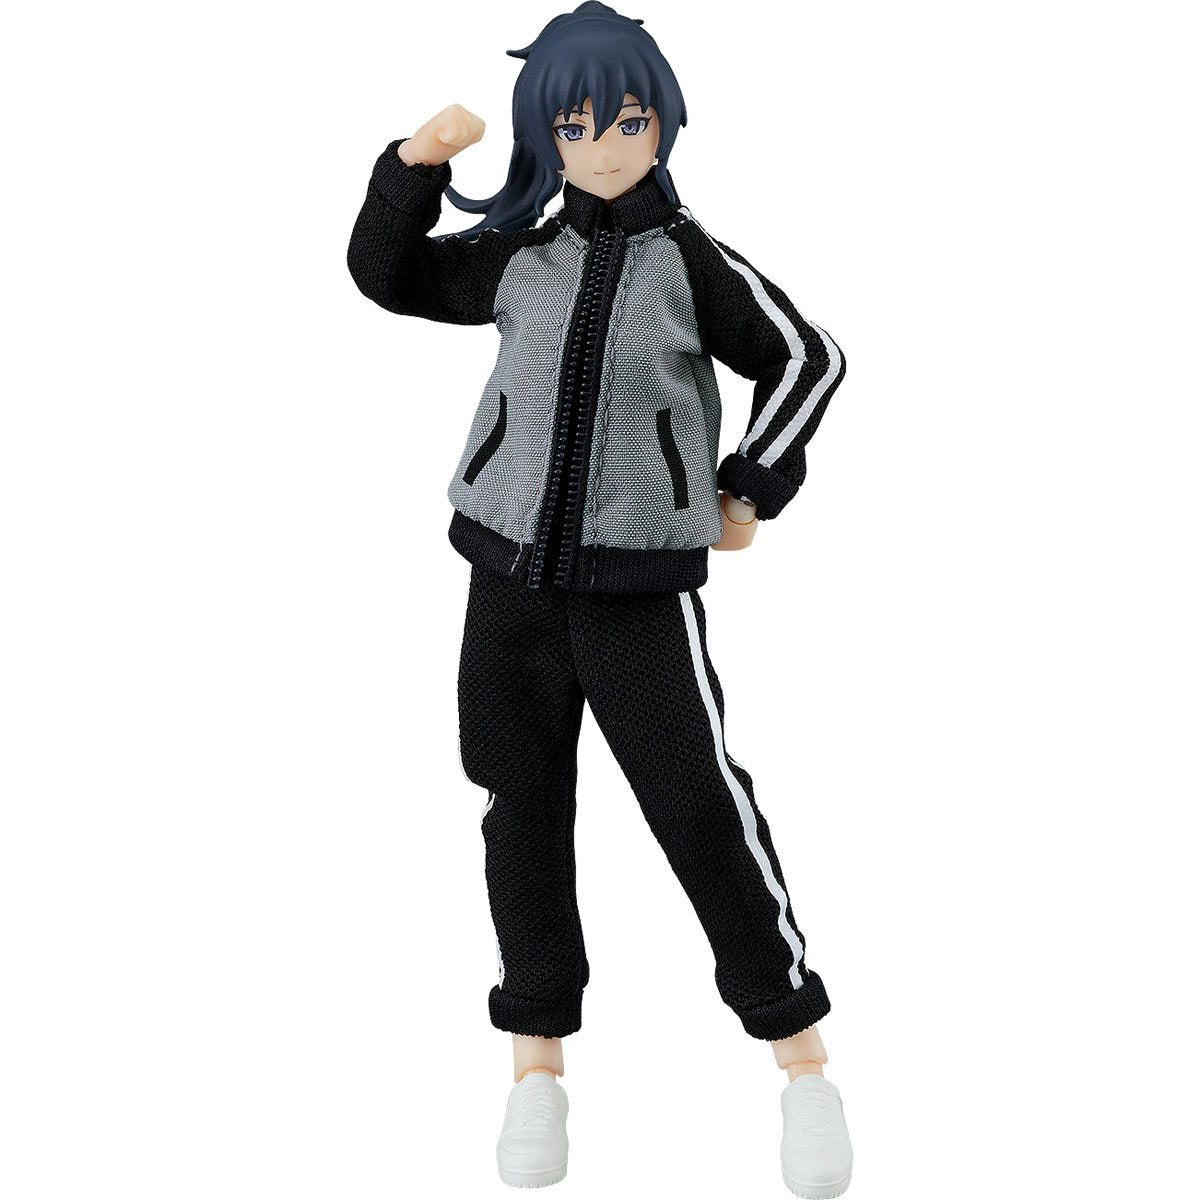 Makoto with Tracksuit Outfit and Skirt Female Body Figure Max Factory Figma